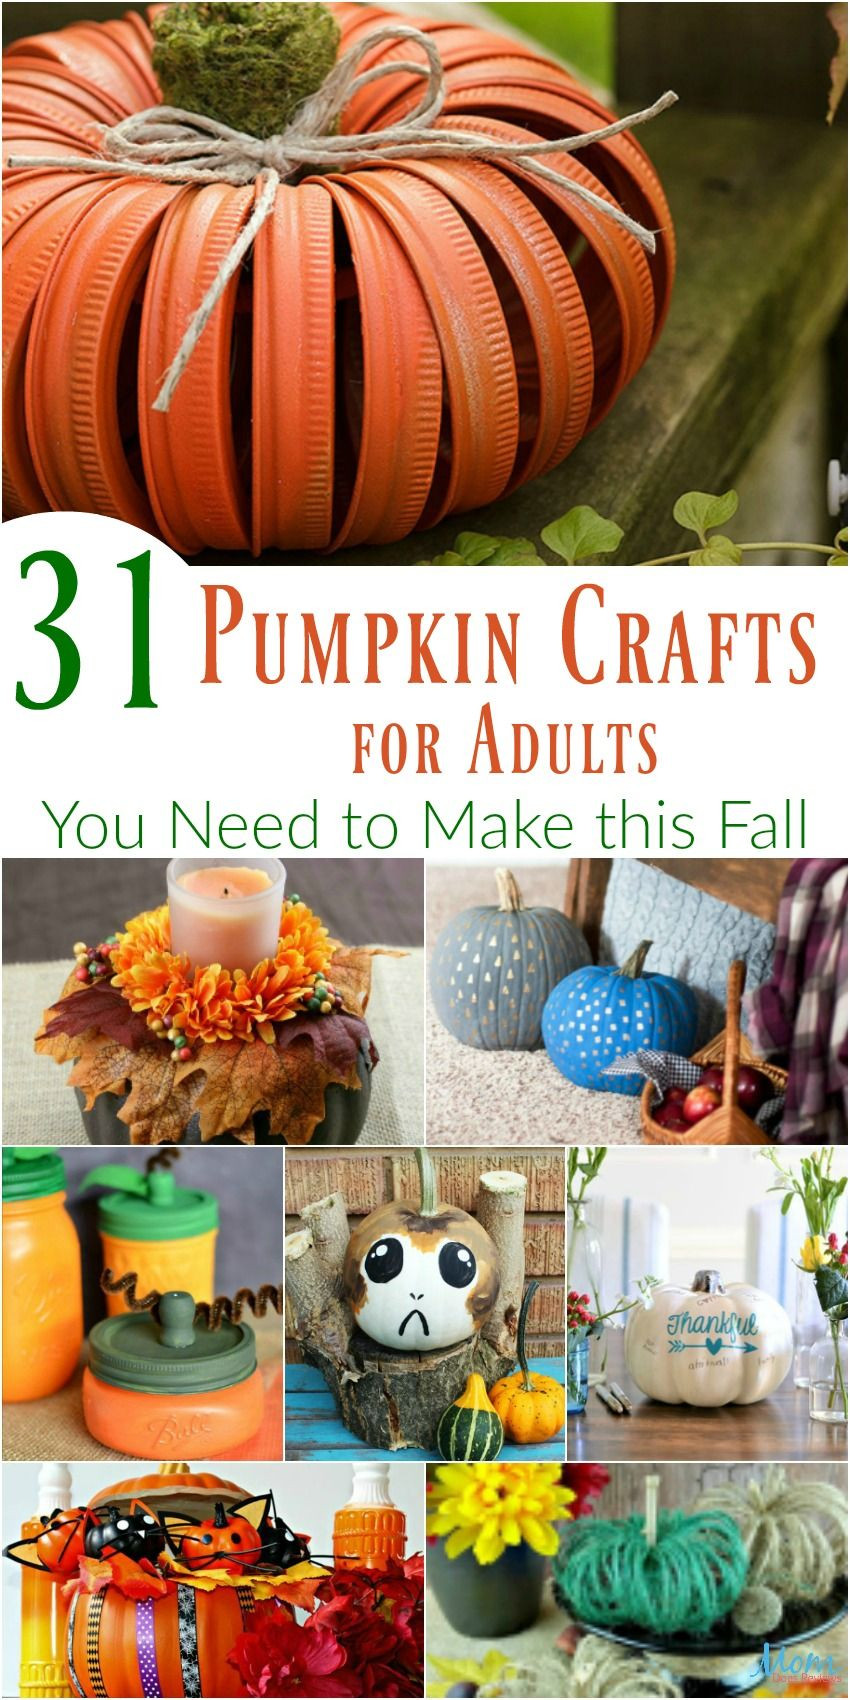 Fun Crafting Ideas For Adults
 31 Pumpkin Crafts for Adults You Need to Make this Fall